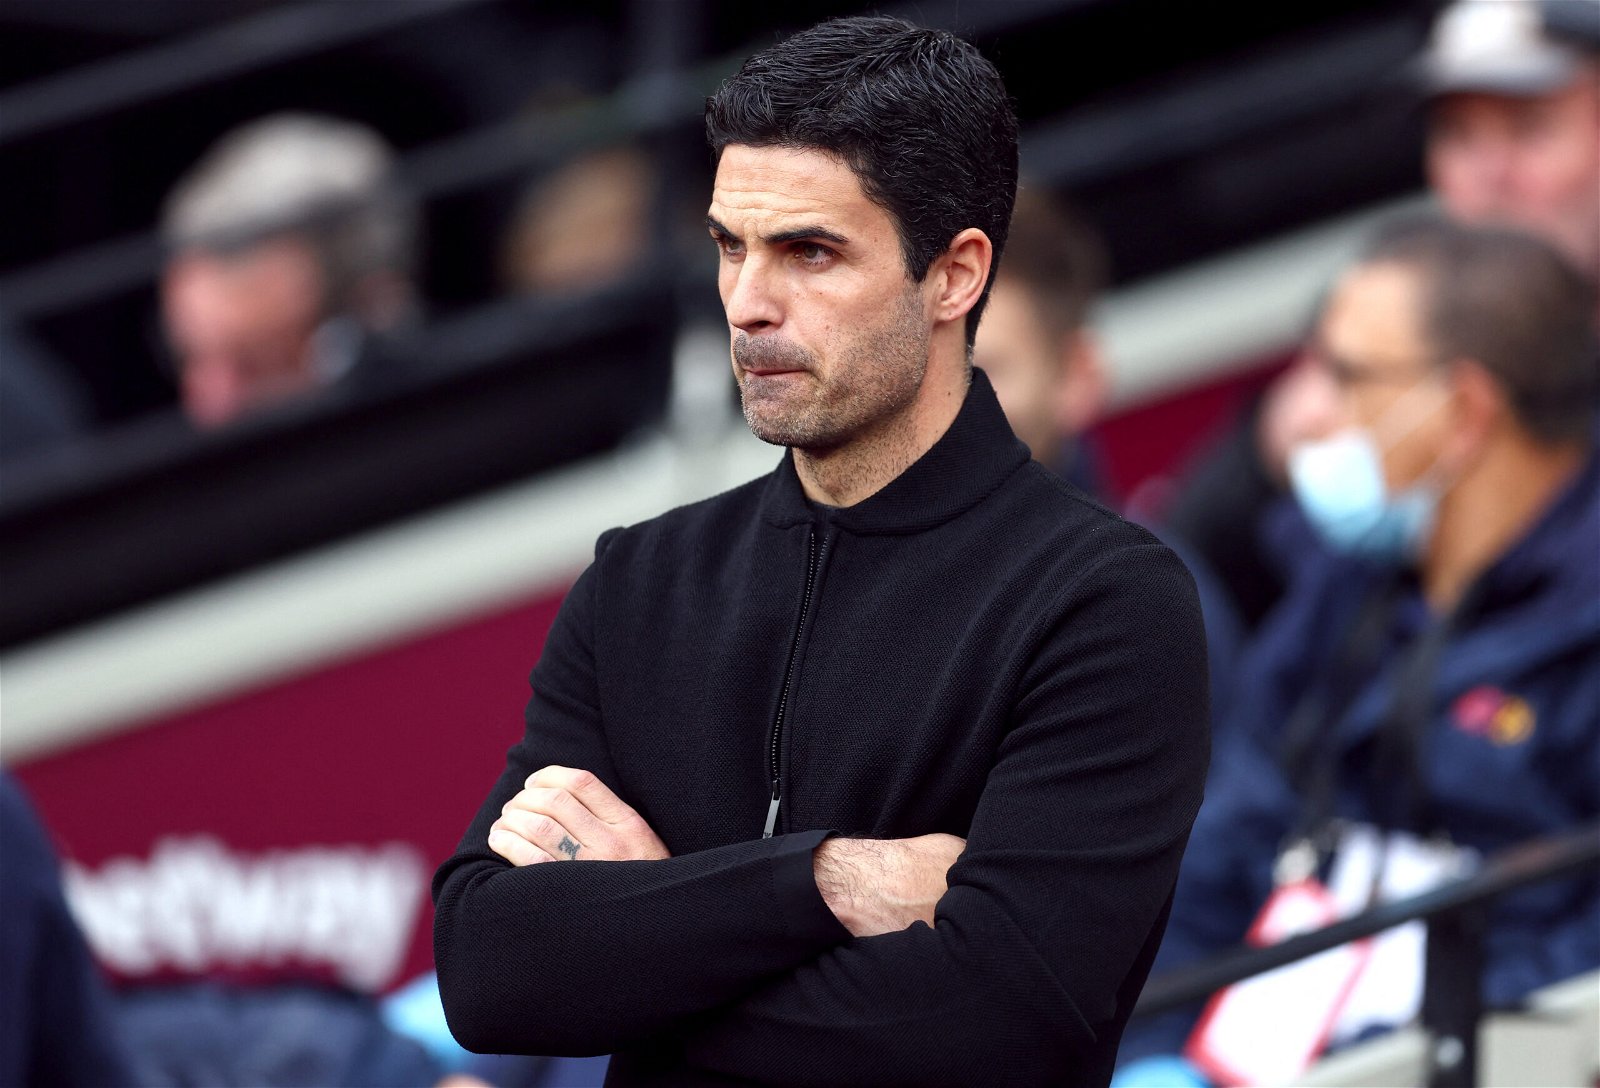 Mikel-Arteta-looks-on-in-Arsenals-crucial-win-over-West-Ham-United-in-the-Premier-League